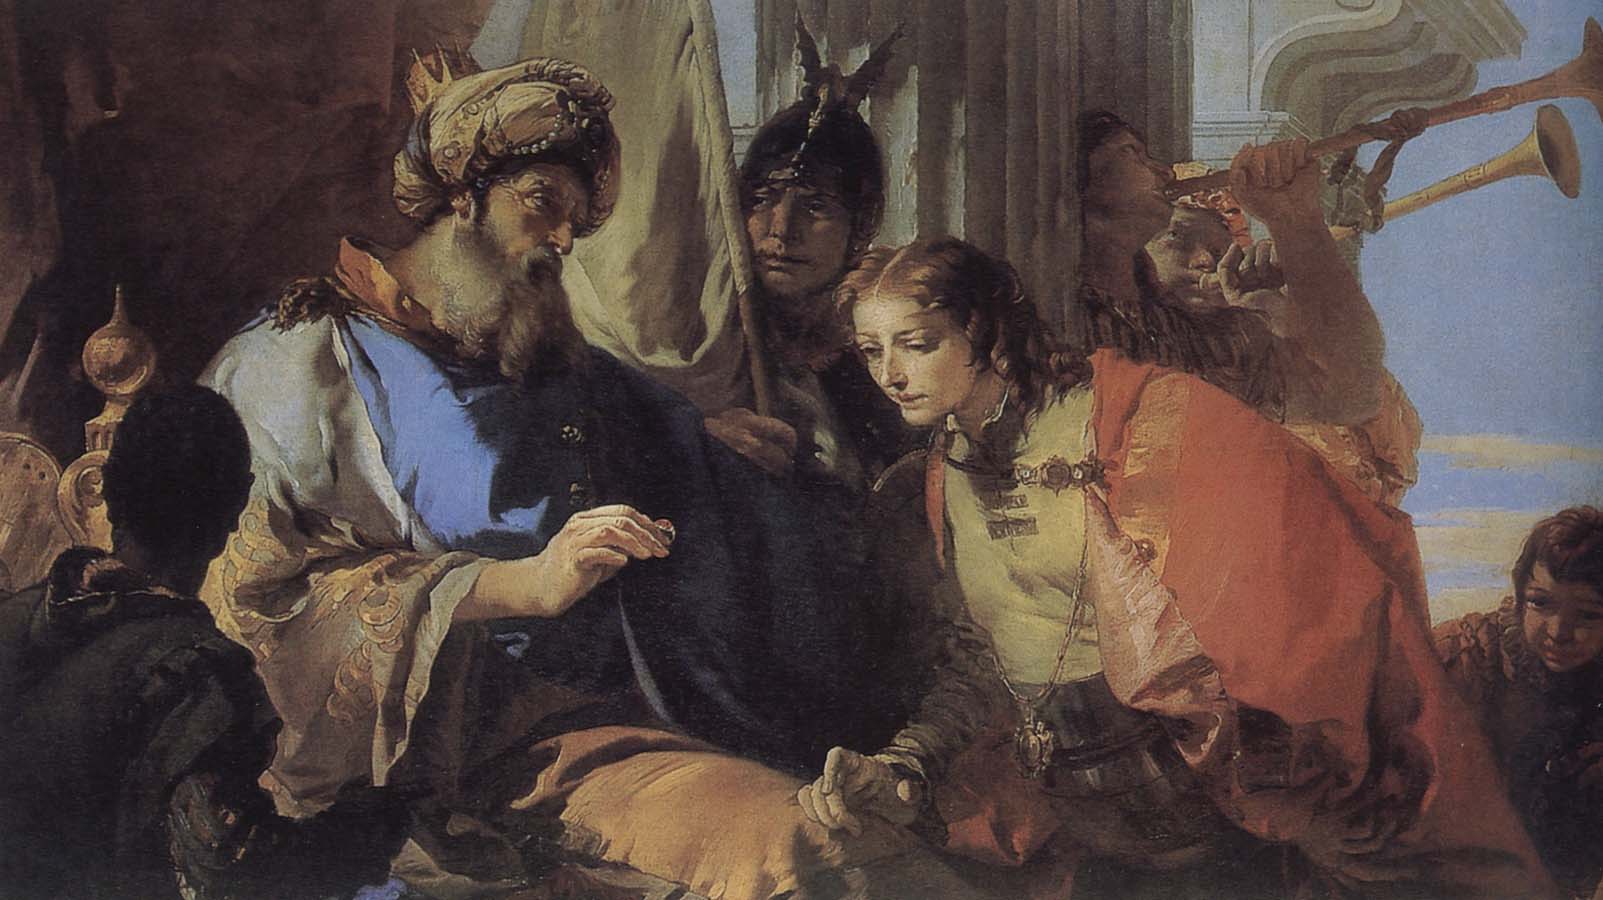 Joseph received the hand of Pharaoh, Central